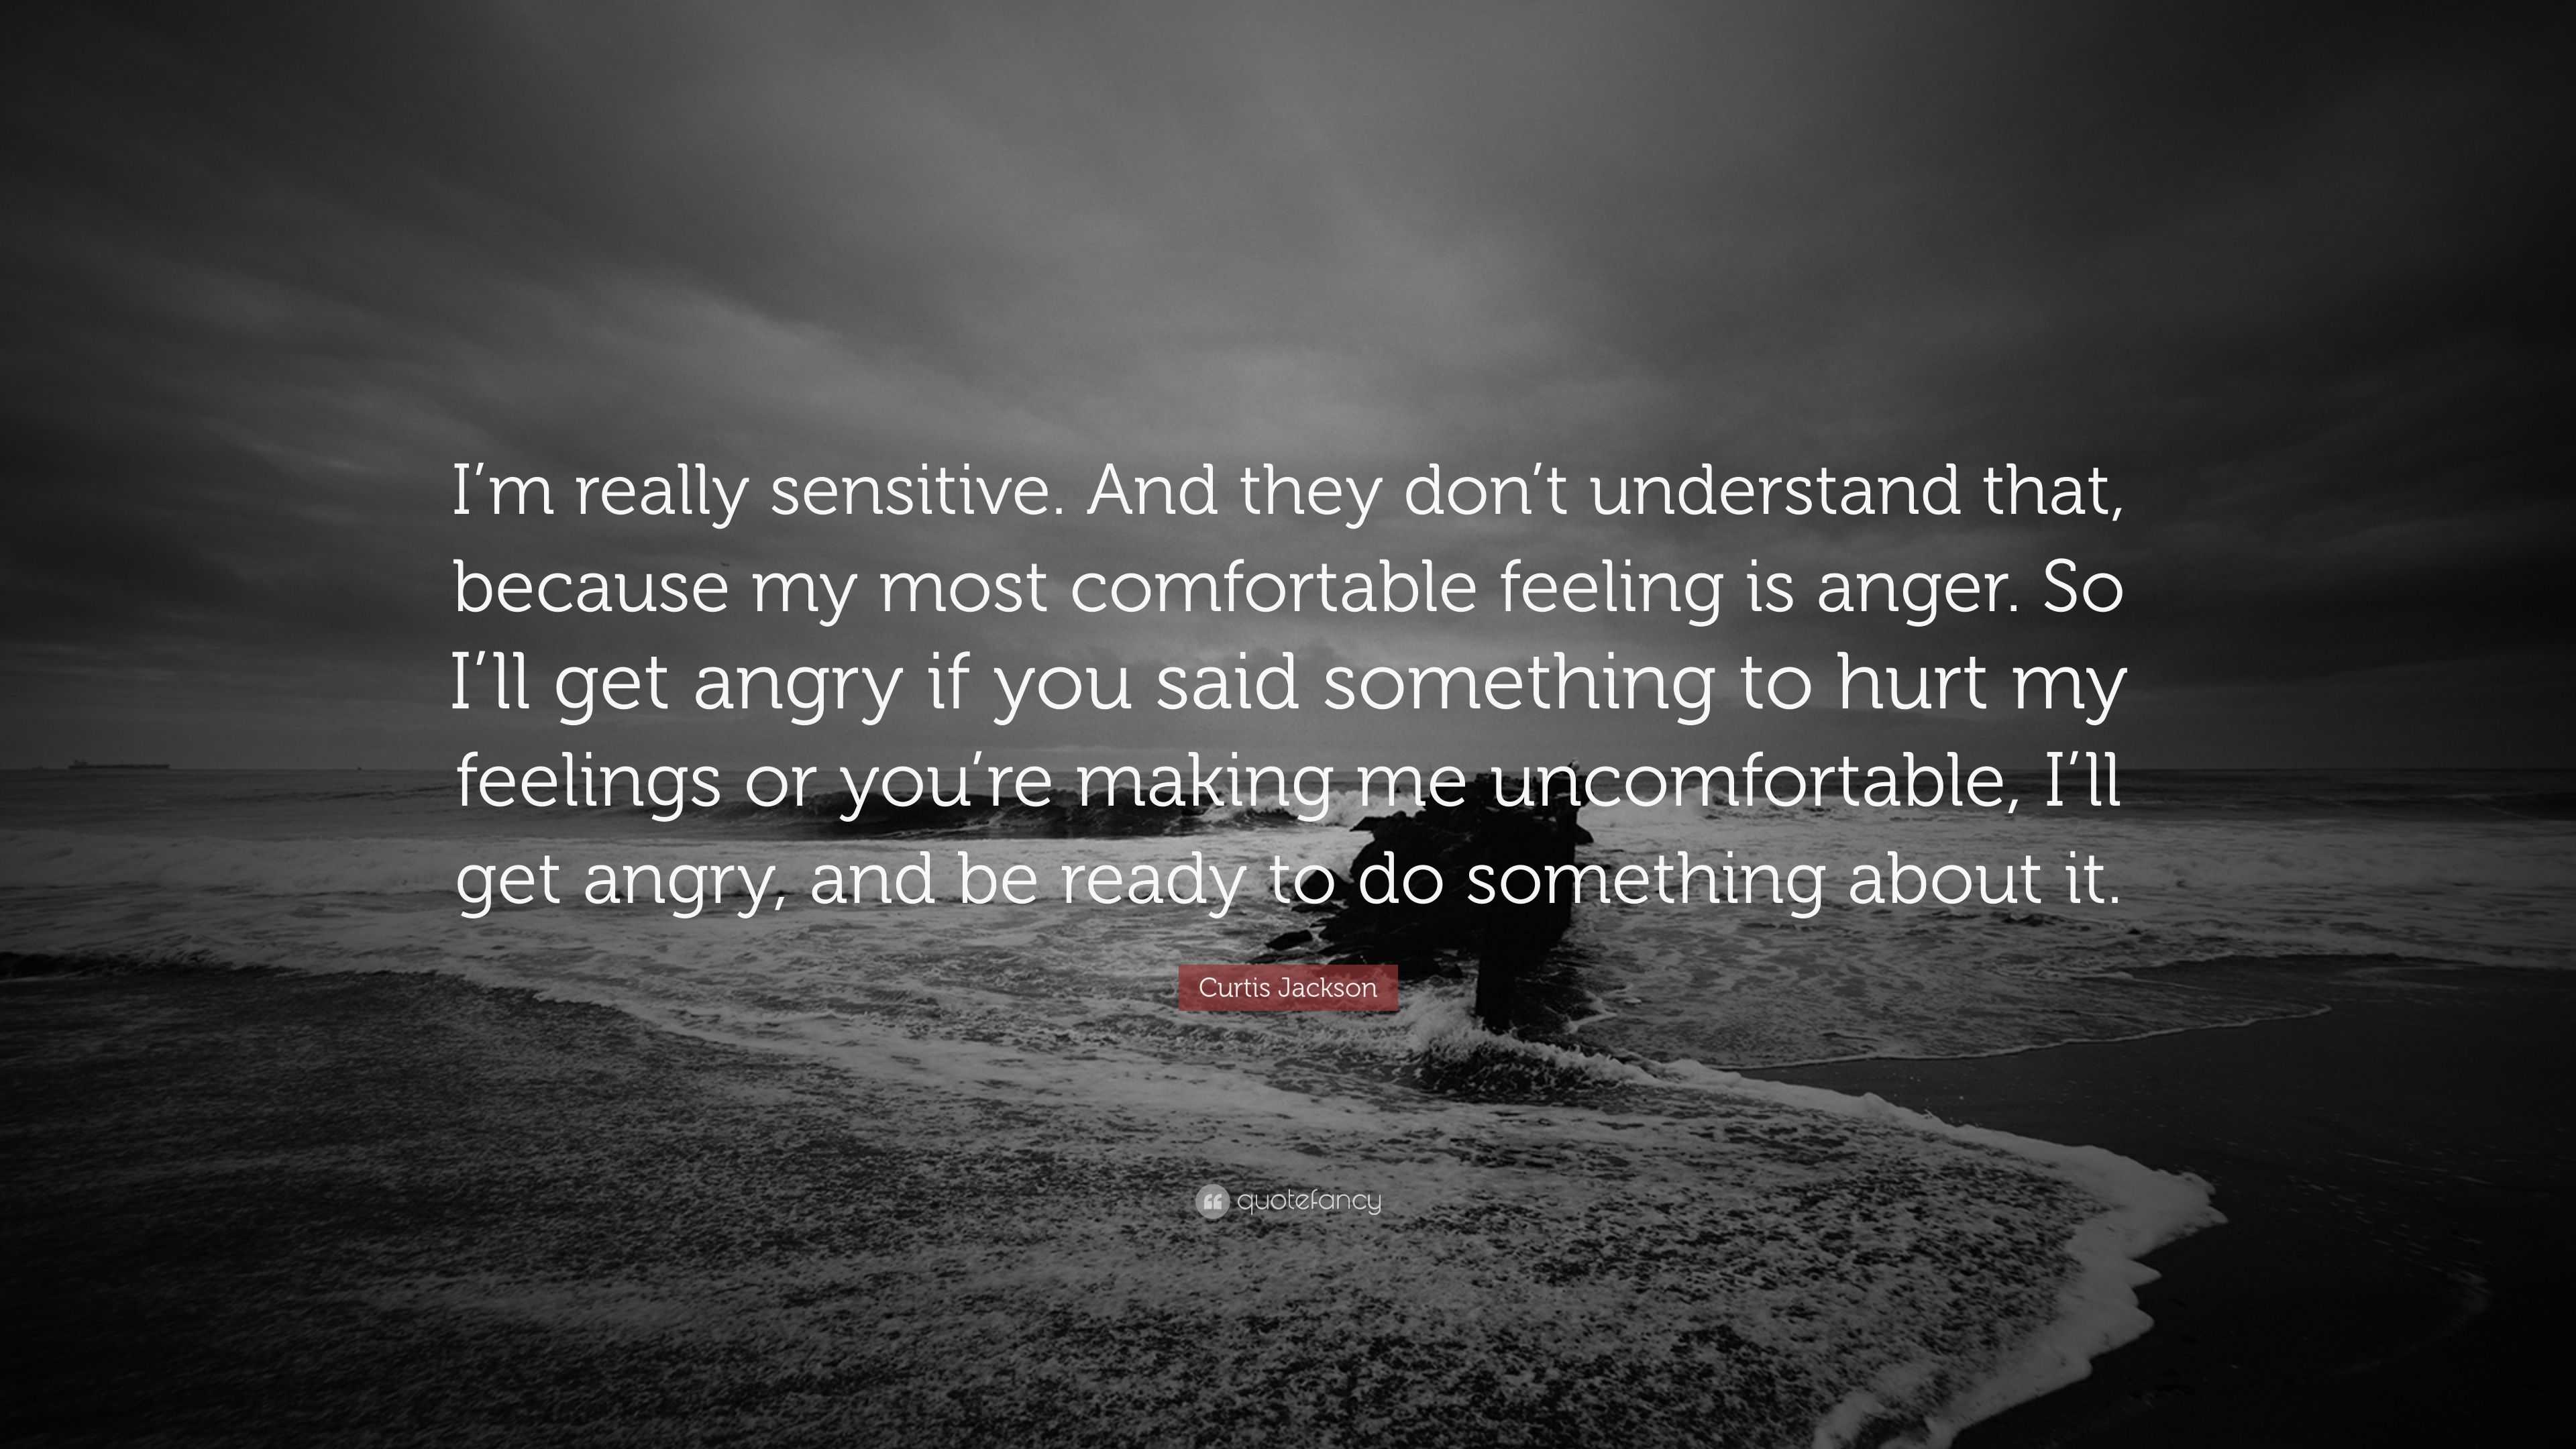 Help Me Understand: Why Am I So Sensitive?